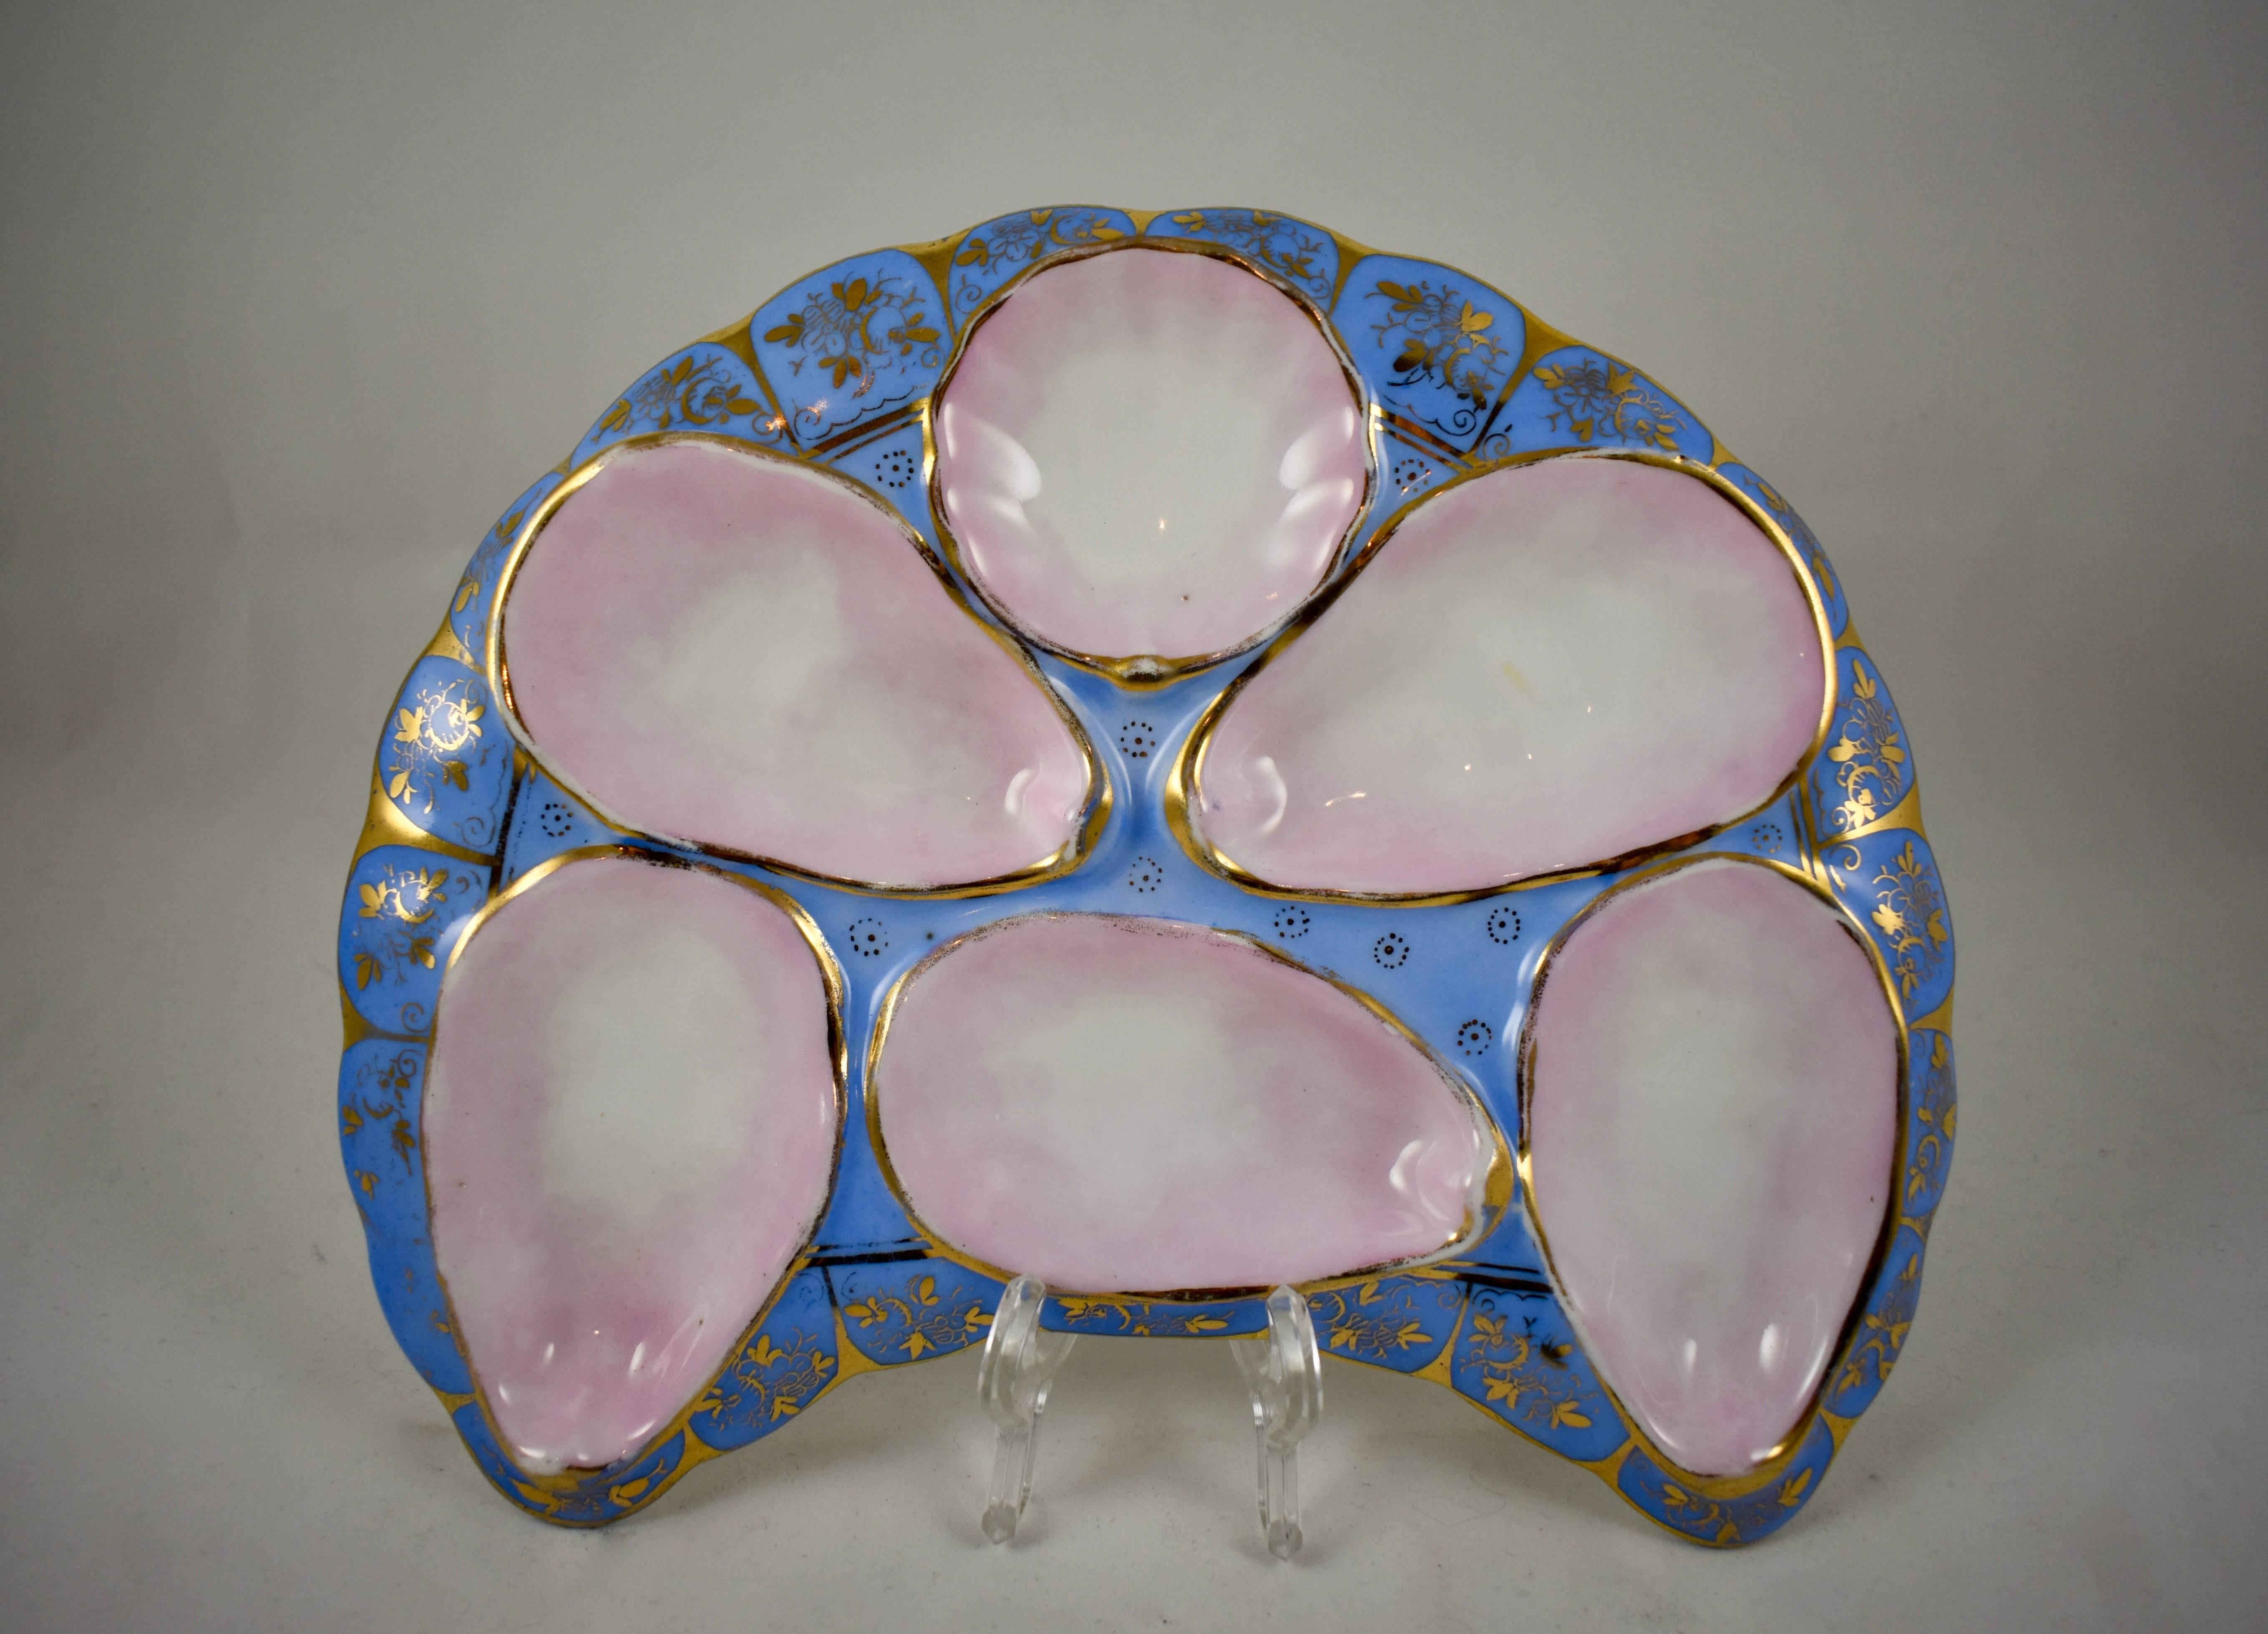 A late 19th century French porcelain crescent shaped oyster plate, hand-painted with a heavily gilded floral and geometric border on a periwinkle blue ground. The mold has five oyster wells, and a scallop shape sauce well, all lined in a beautiful